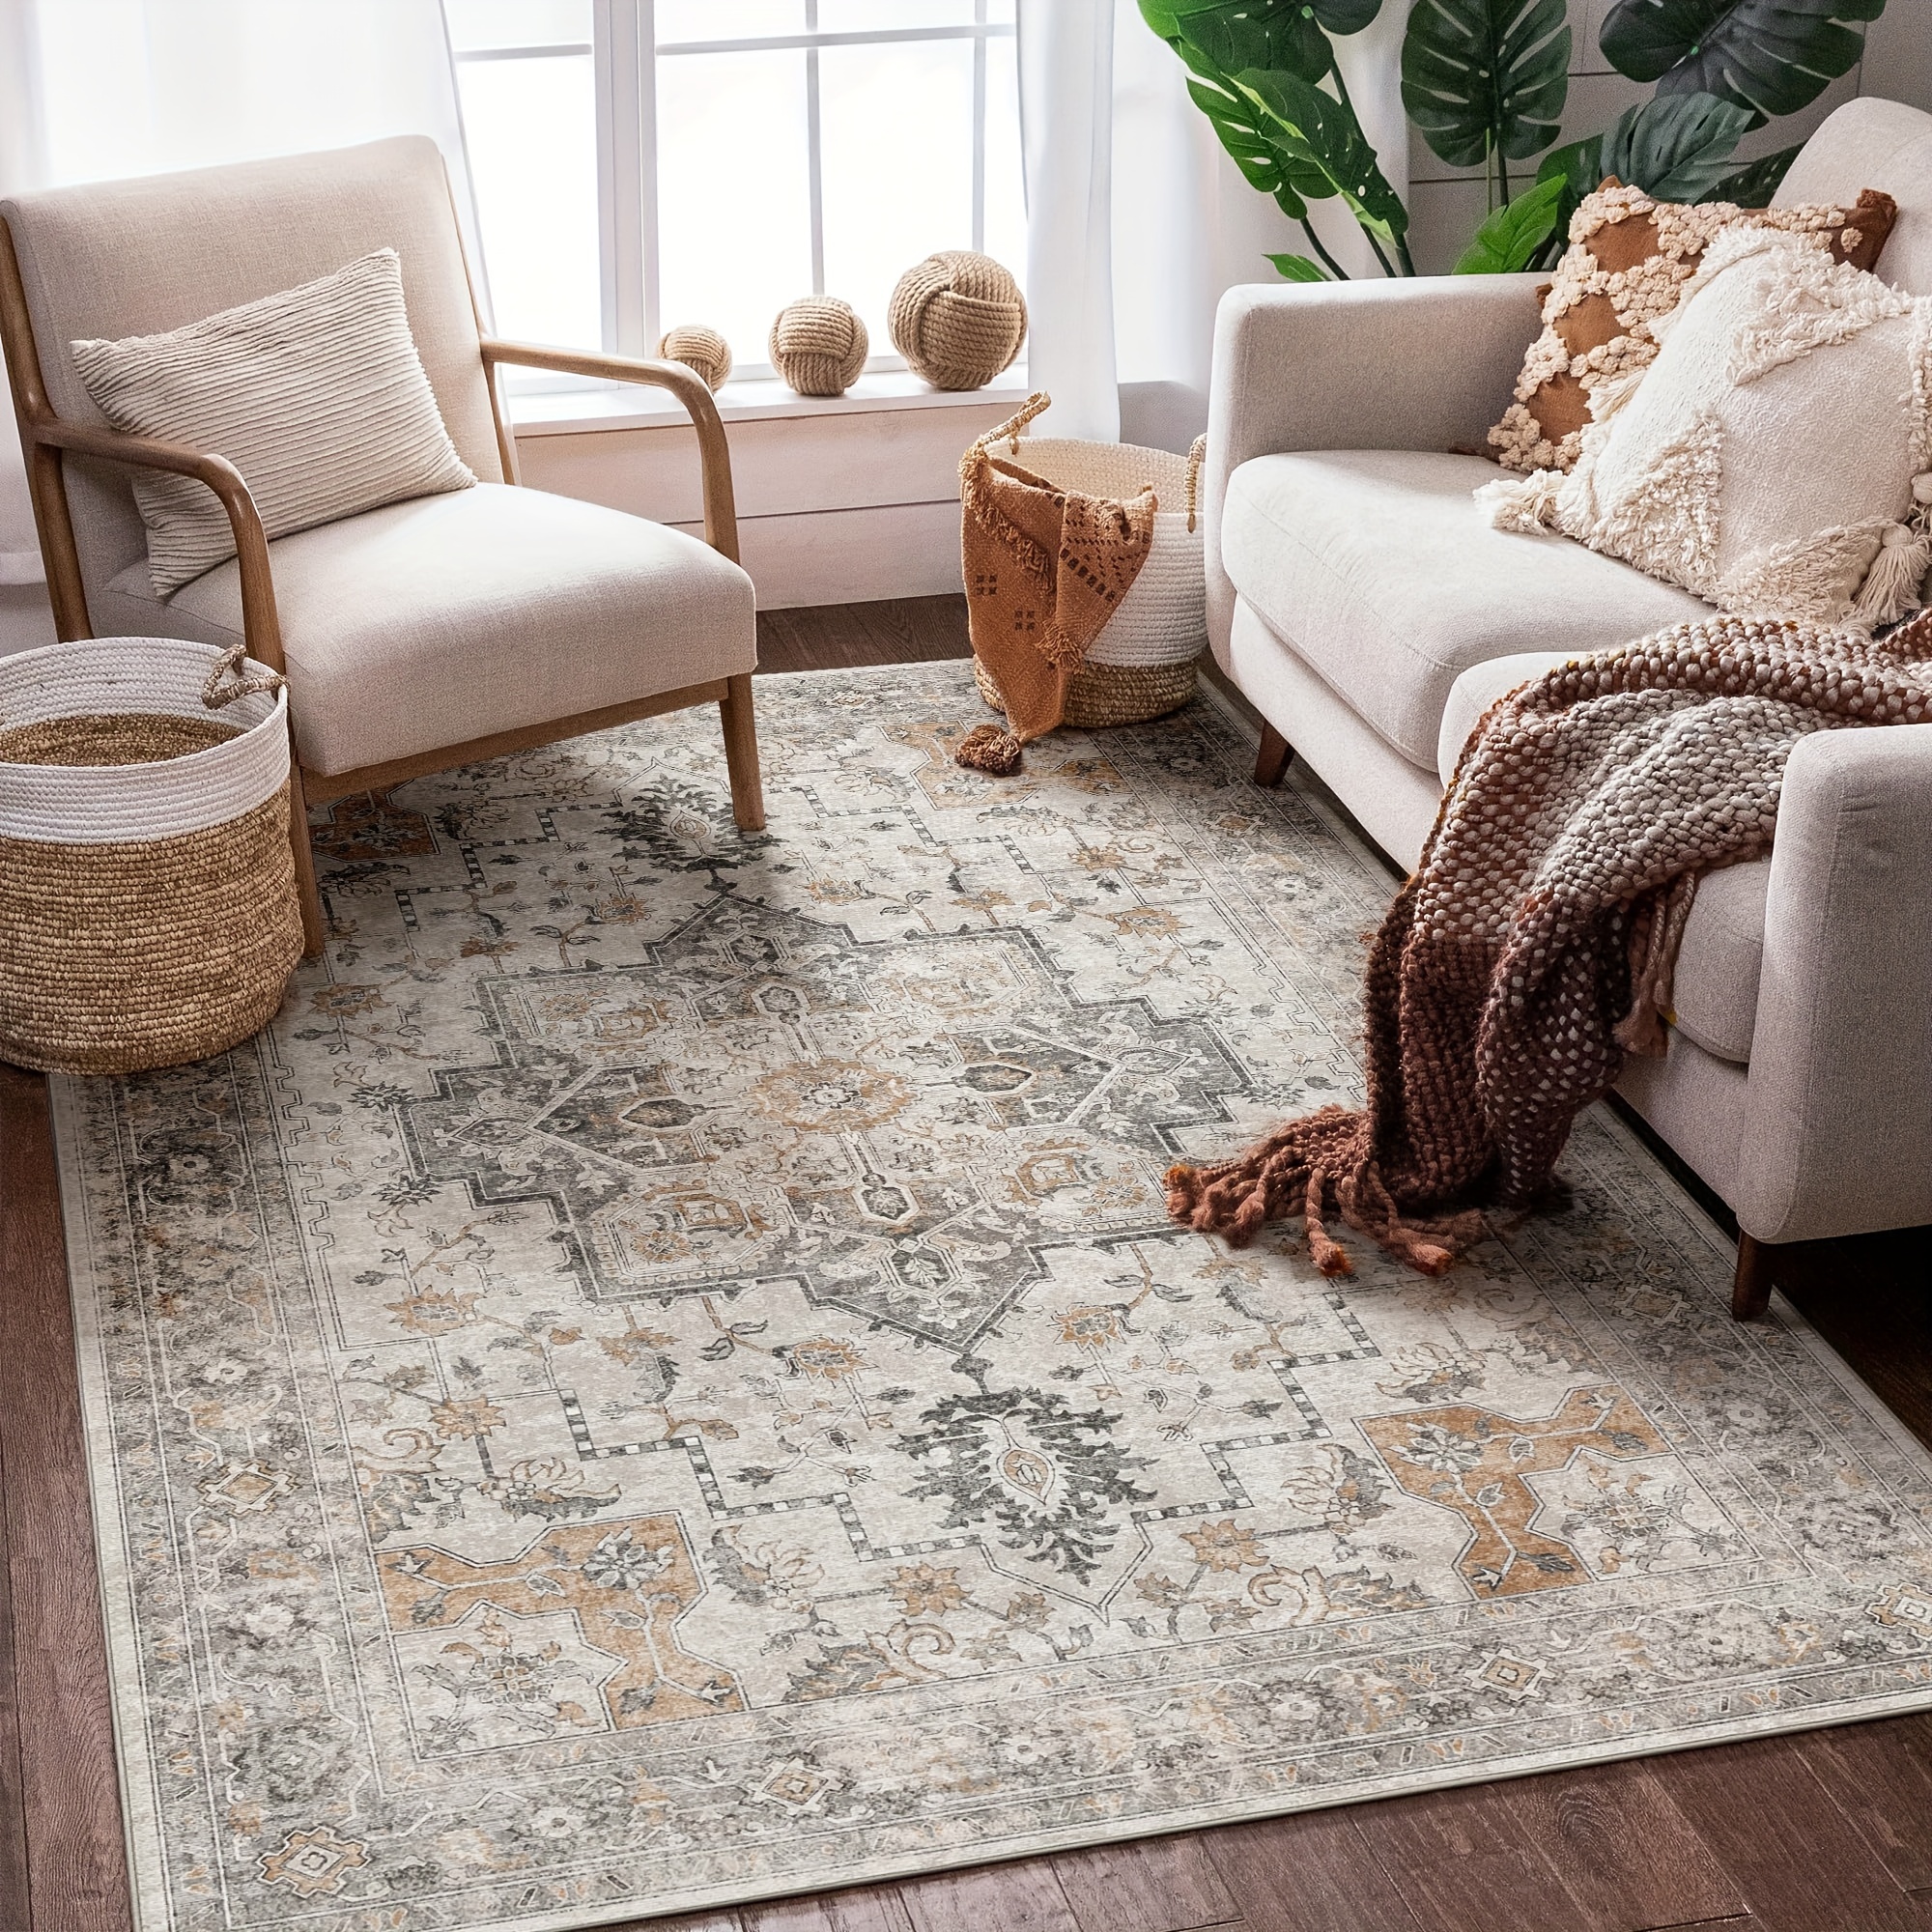 

Area Rugs For Living Room, Machine Washable Non Slip Vintage Retro Rugs, Low Pile Lightweight Chenille Print Rug For Bedroom, Dining Room, Home Office, Light Taupe Brown